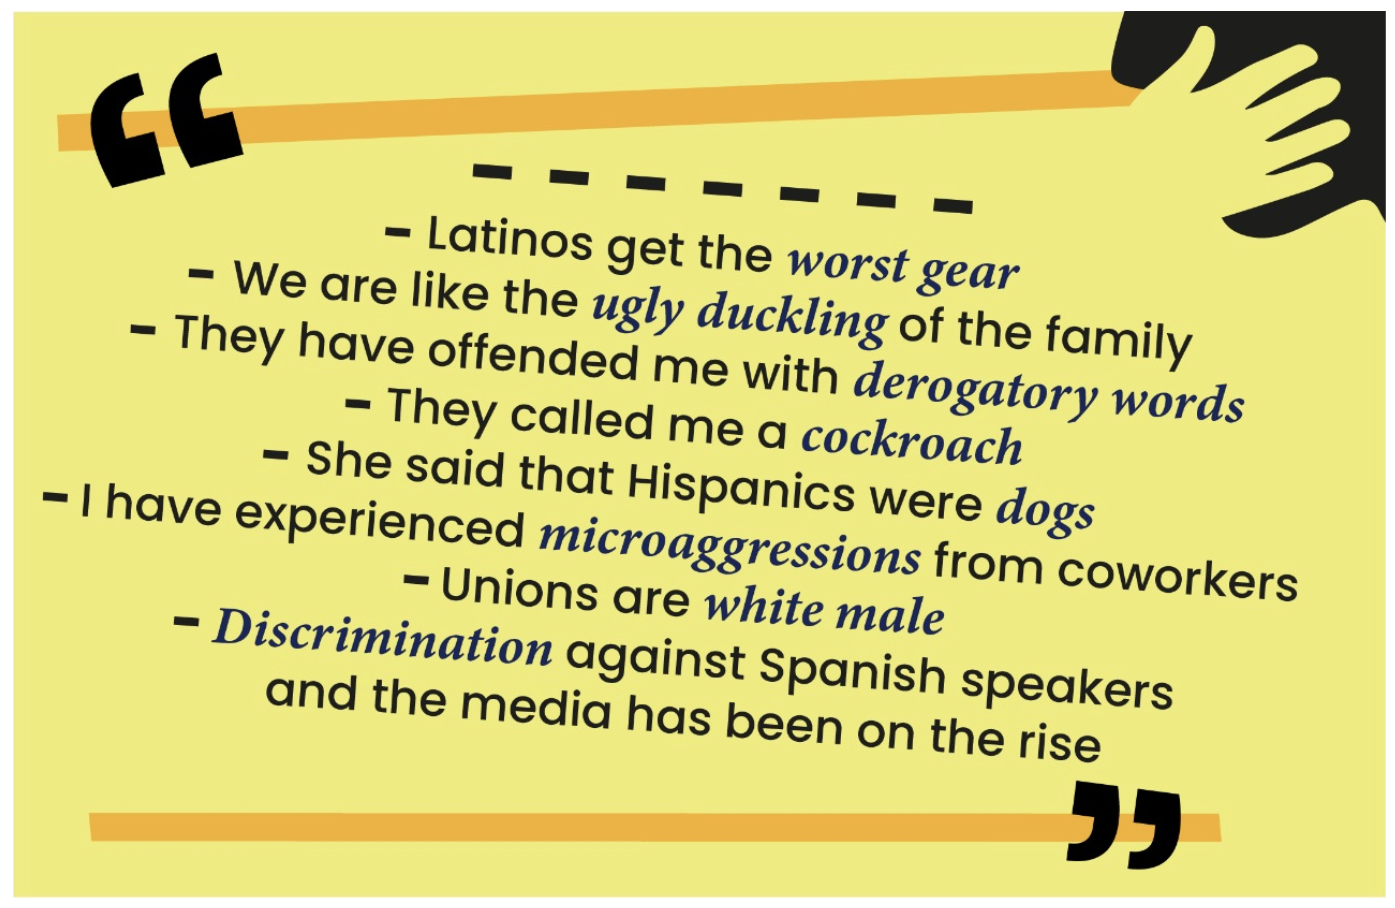 Quotes from our survey on discrimination against Latino journalists in the industry.